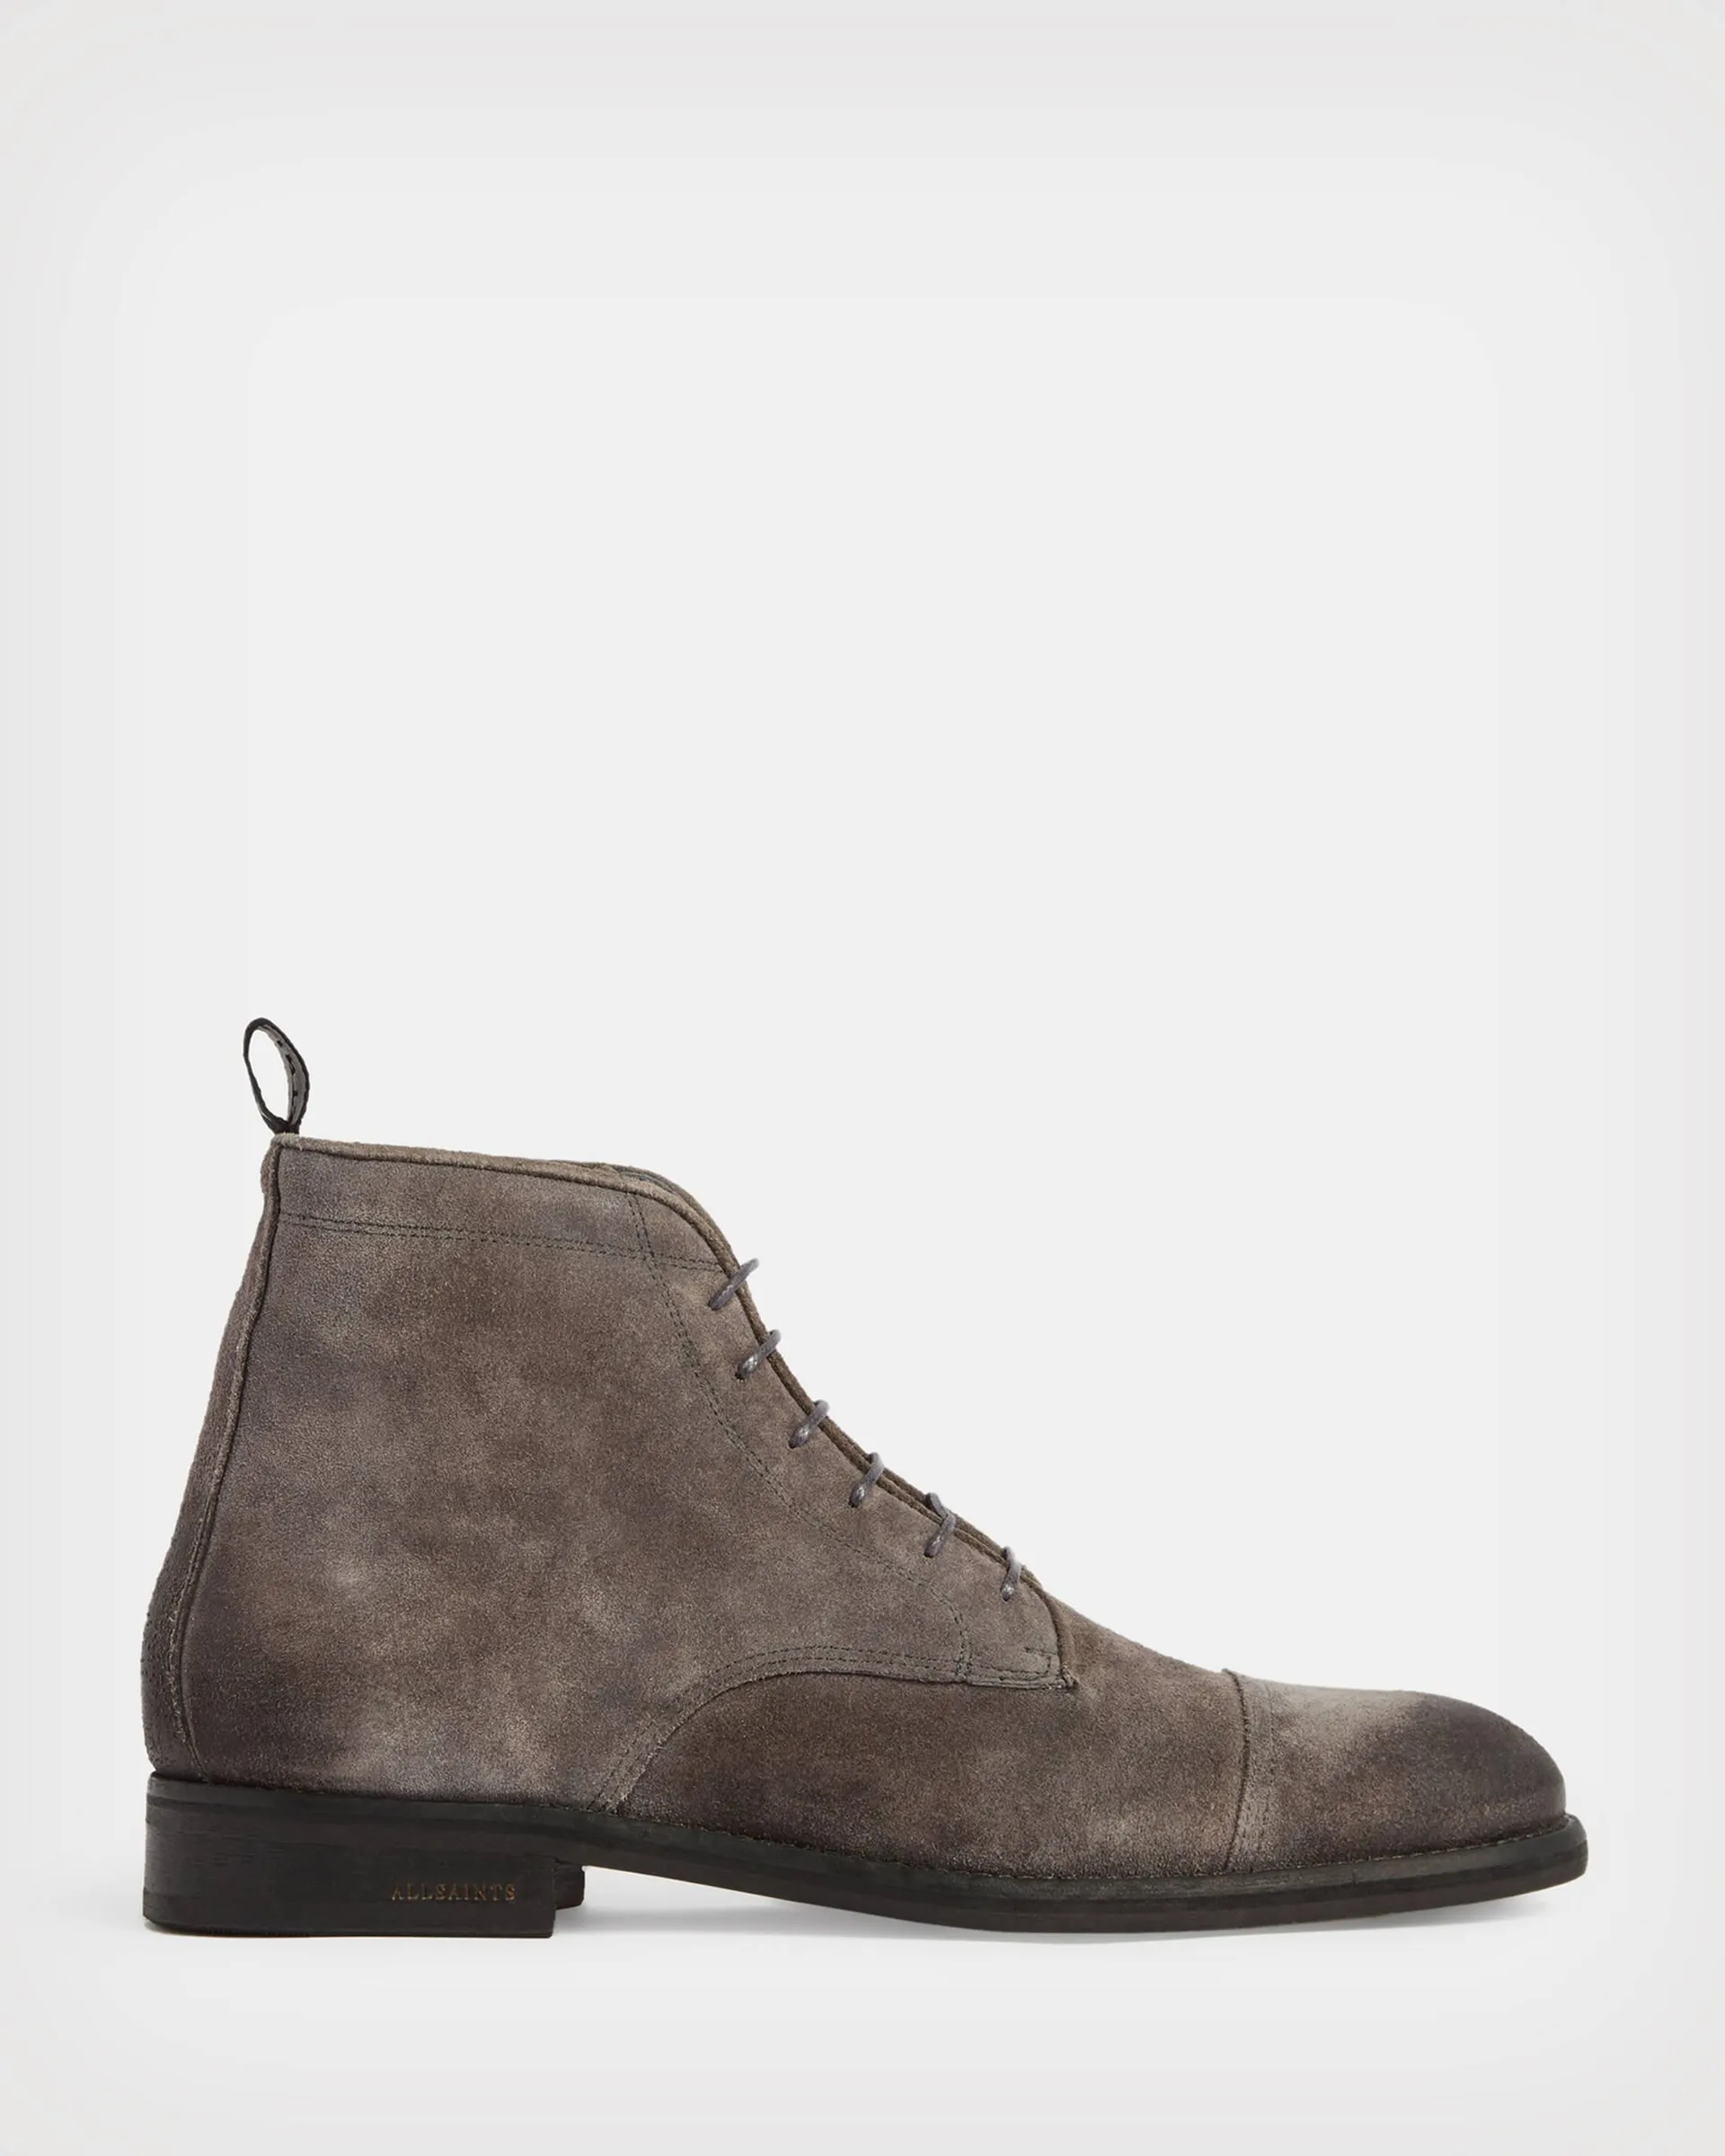 Harland Suede Boots